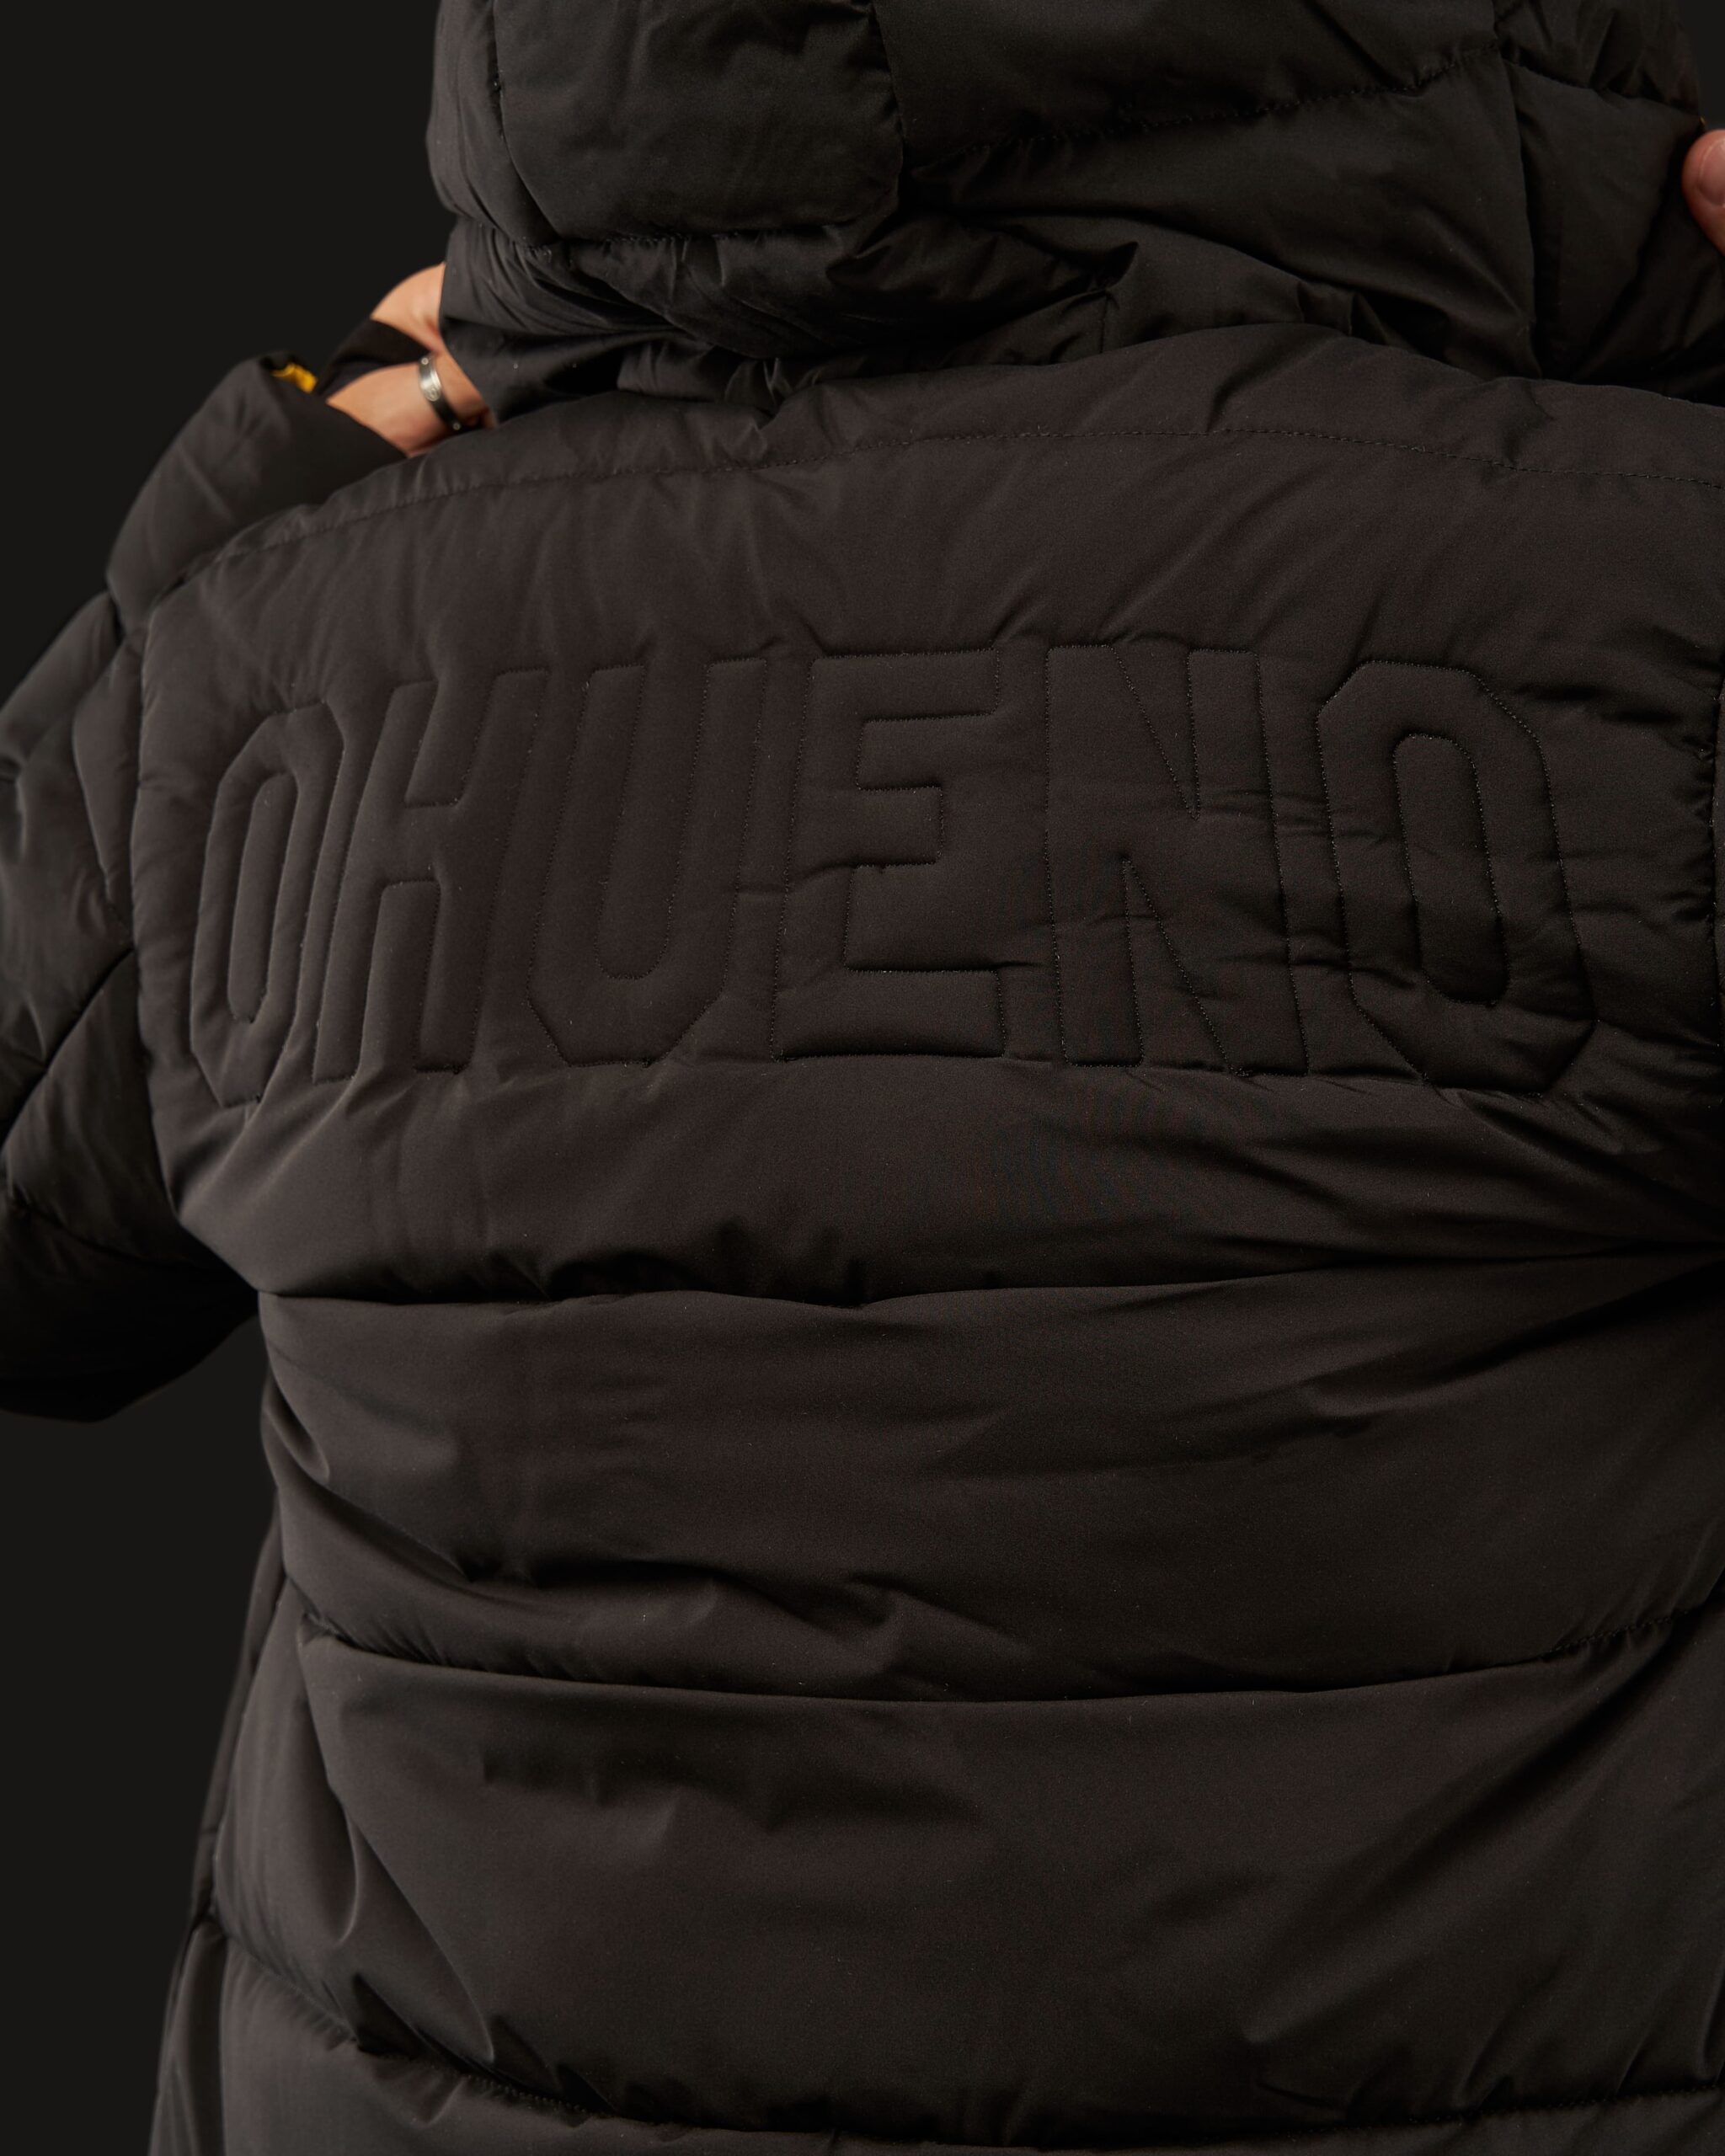 Down jacket Image: https://ohueno-official.com/wp-content/uploads/m01267-scaled.jpg